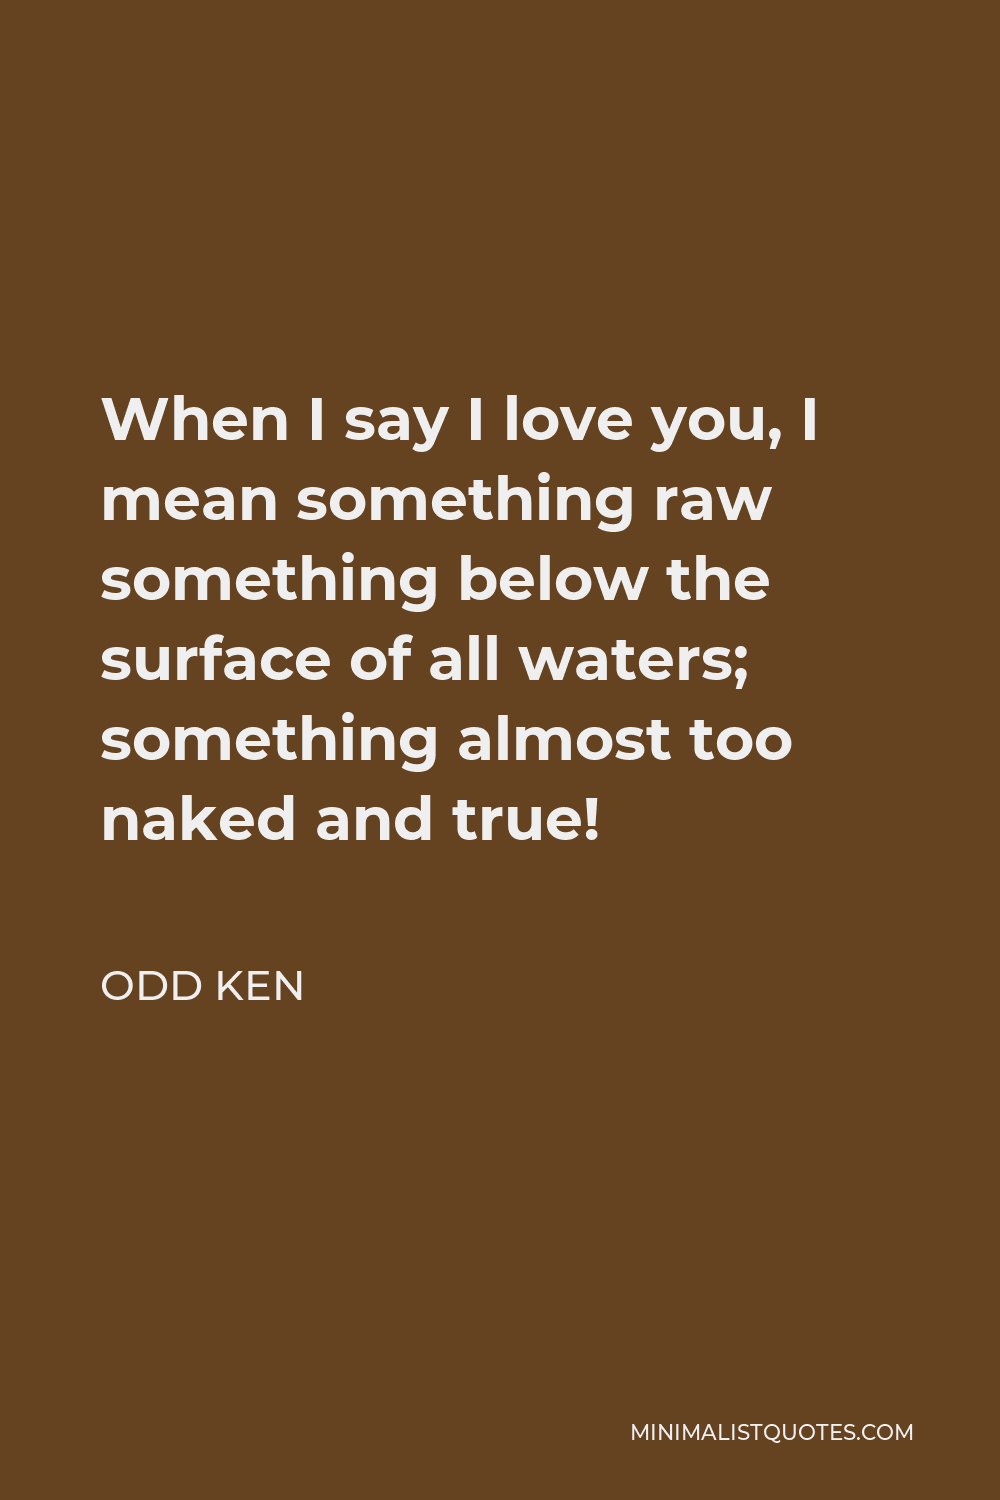 Odd Ken Quote - When I say I love you, I mean something raw something below the surface of all waters; something almost too naked and true!